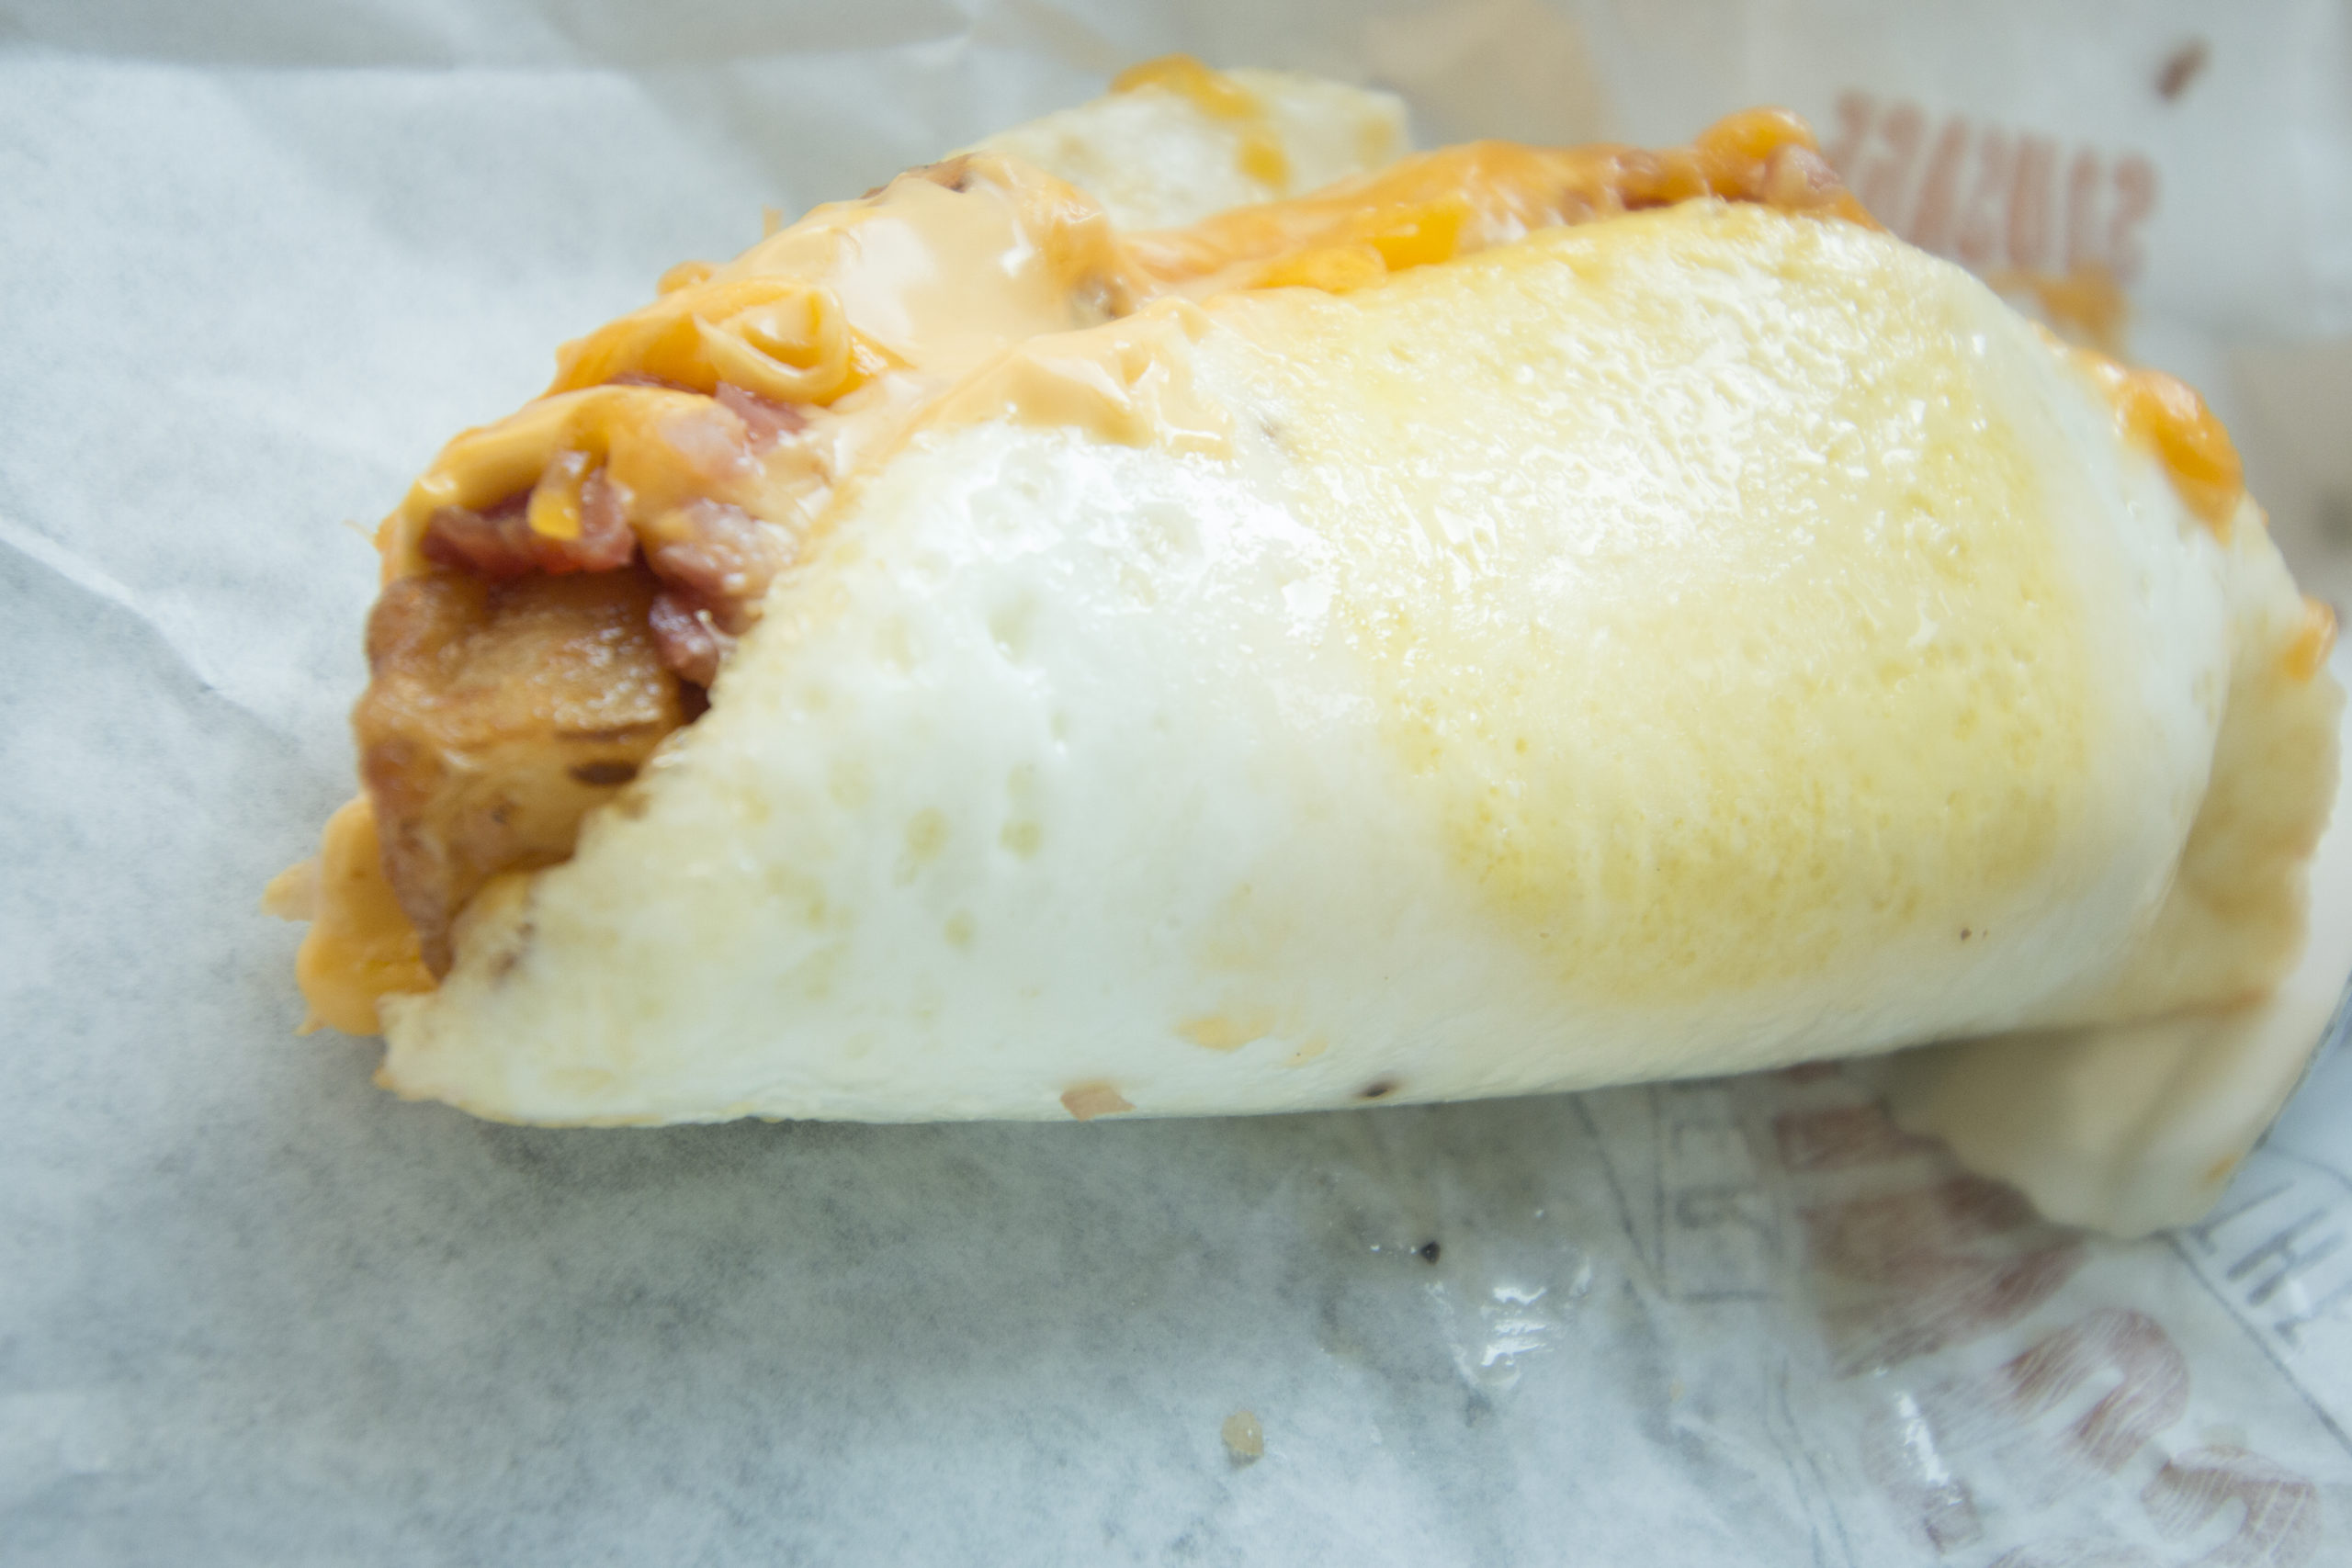 Taco Bell Made A Taco Out Of A Fried Egg, And It Is Delicious